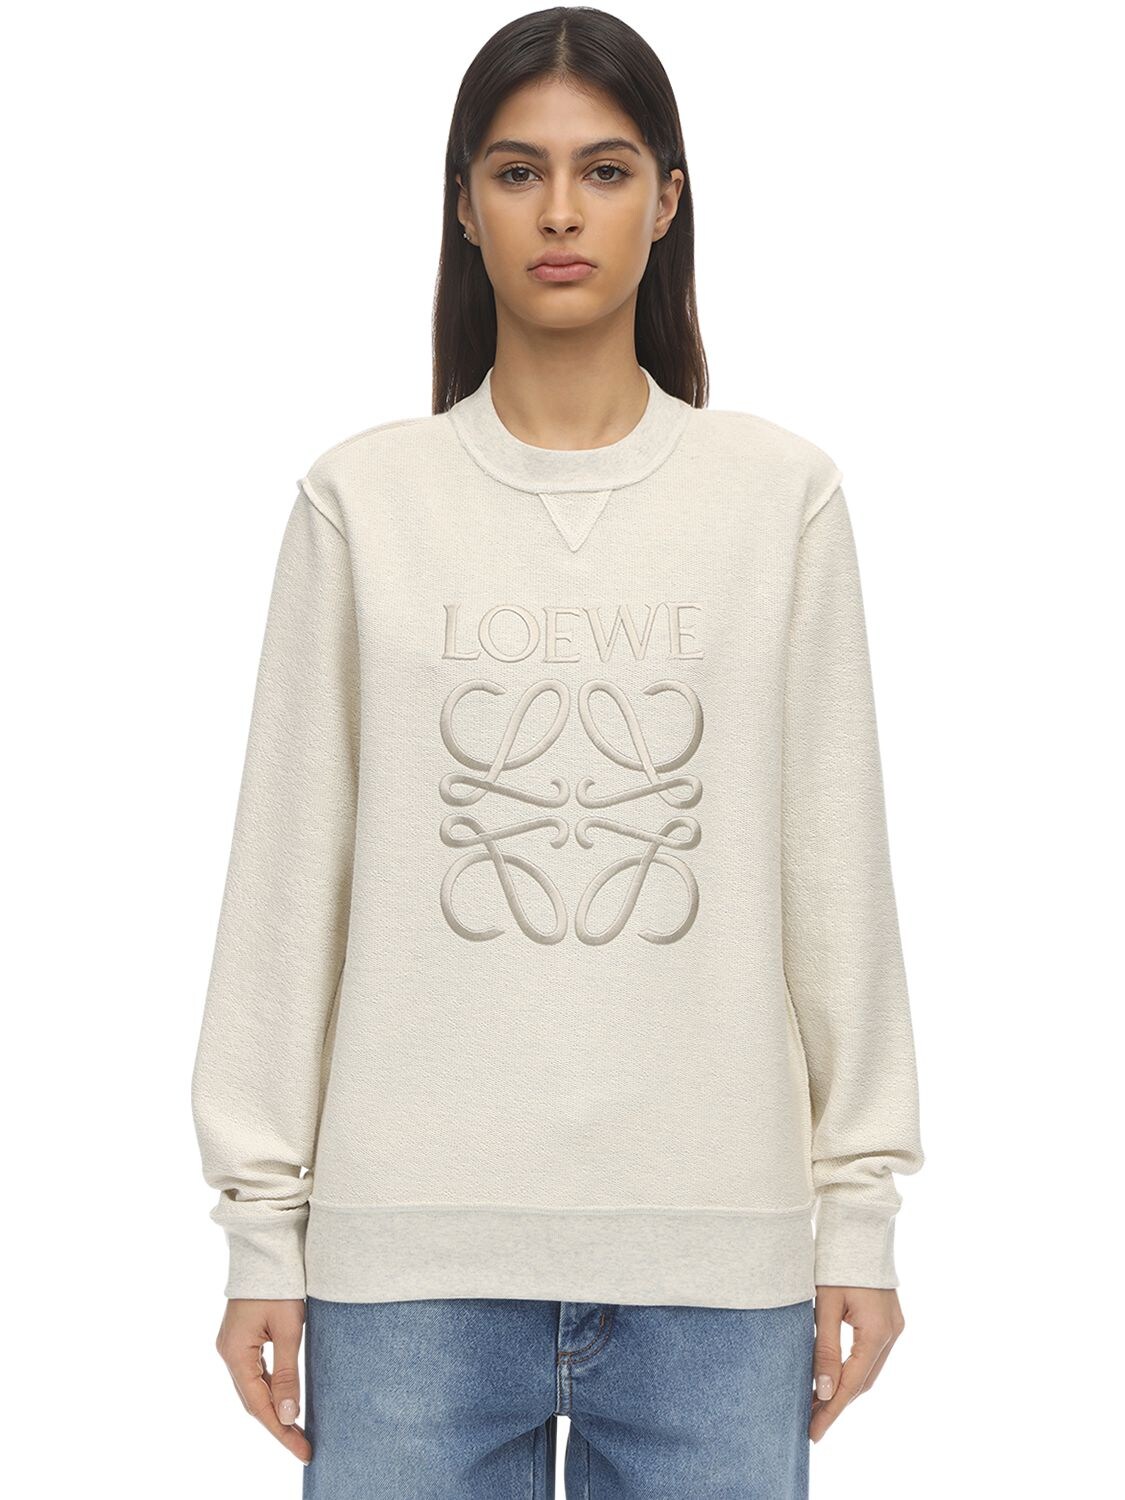 LOEWE EMBROIDERED COTTON JERSEY KNIT SWEATER,71I5BV065-MJQYNQ2